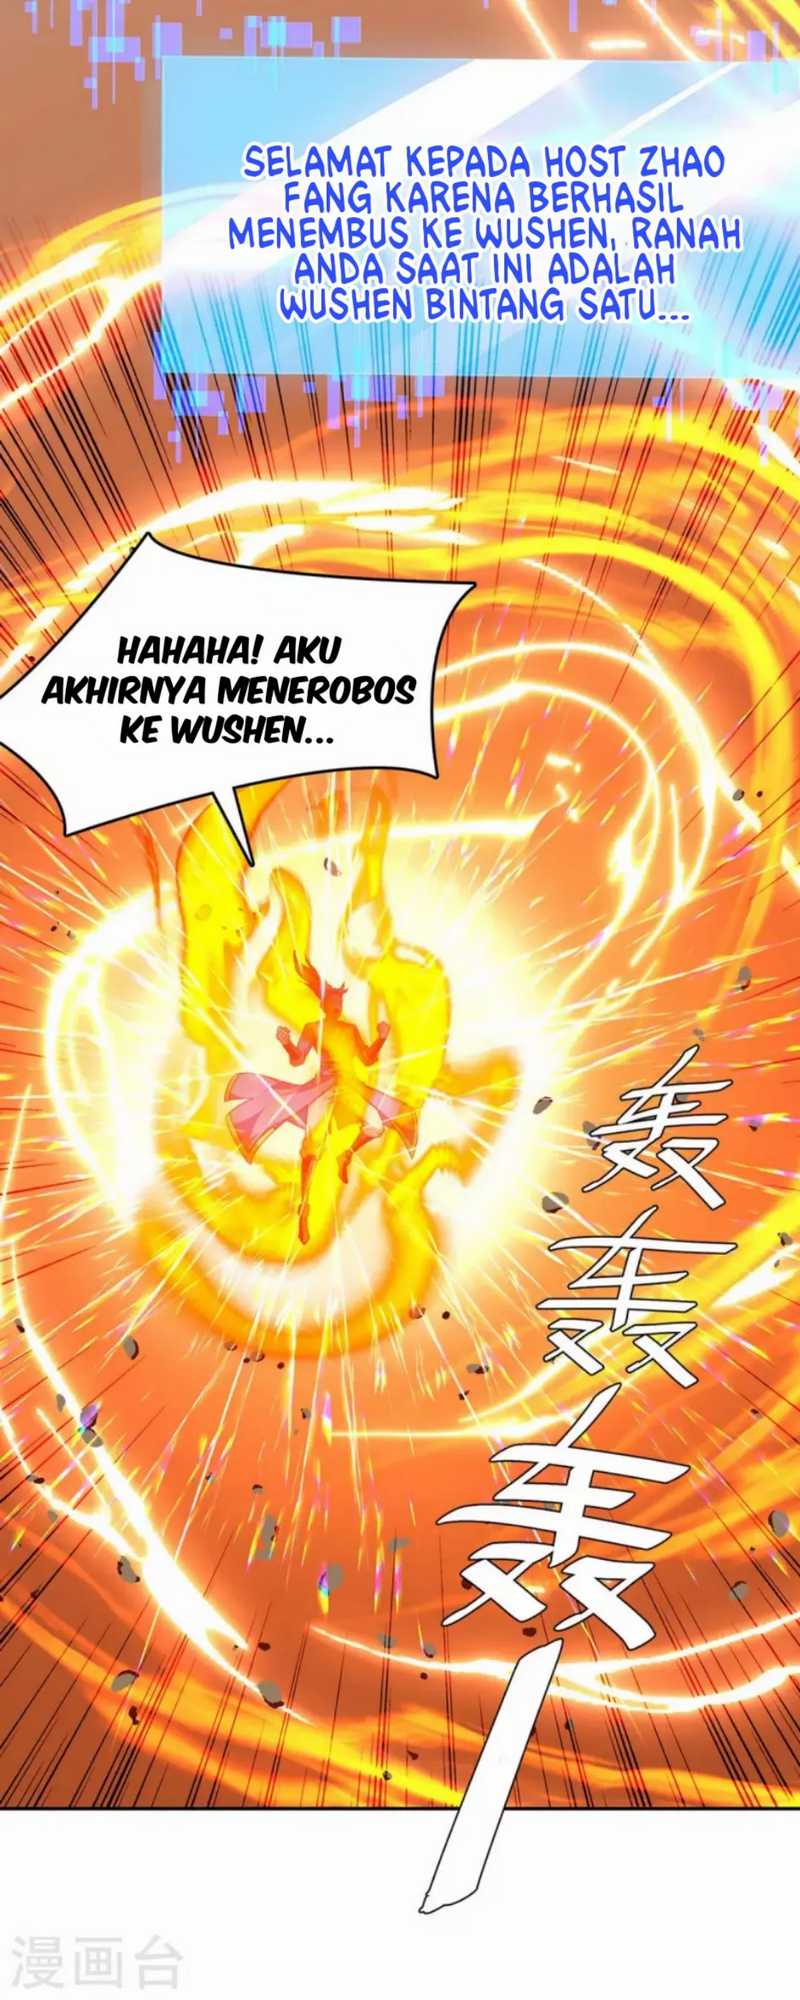 Strongest Leveling Chapter 275